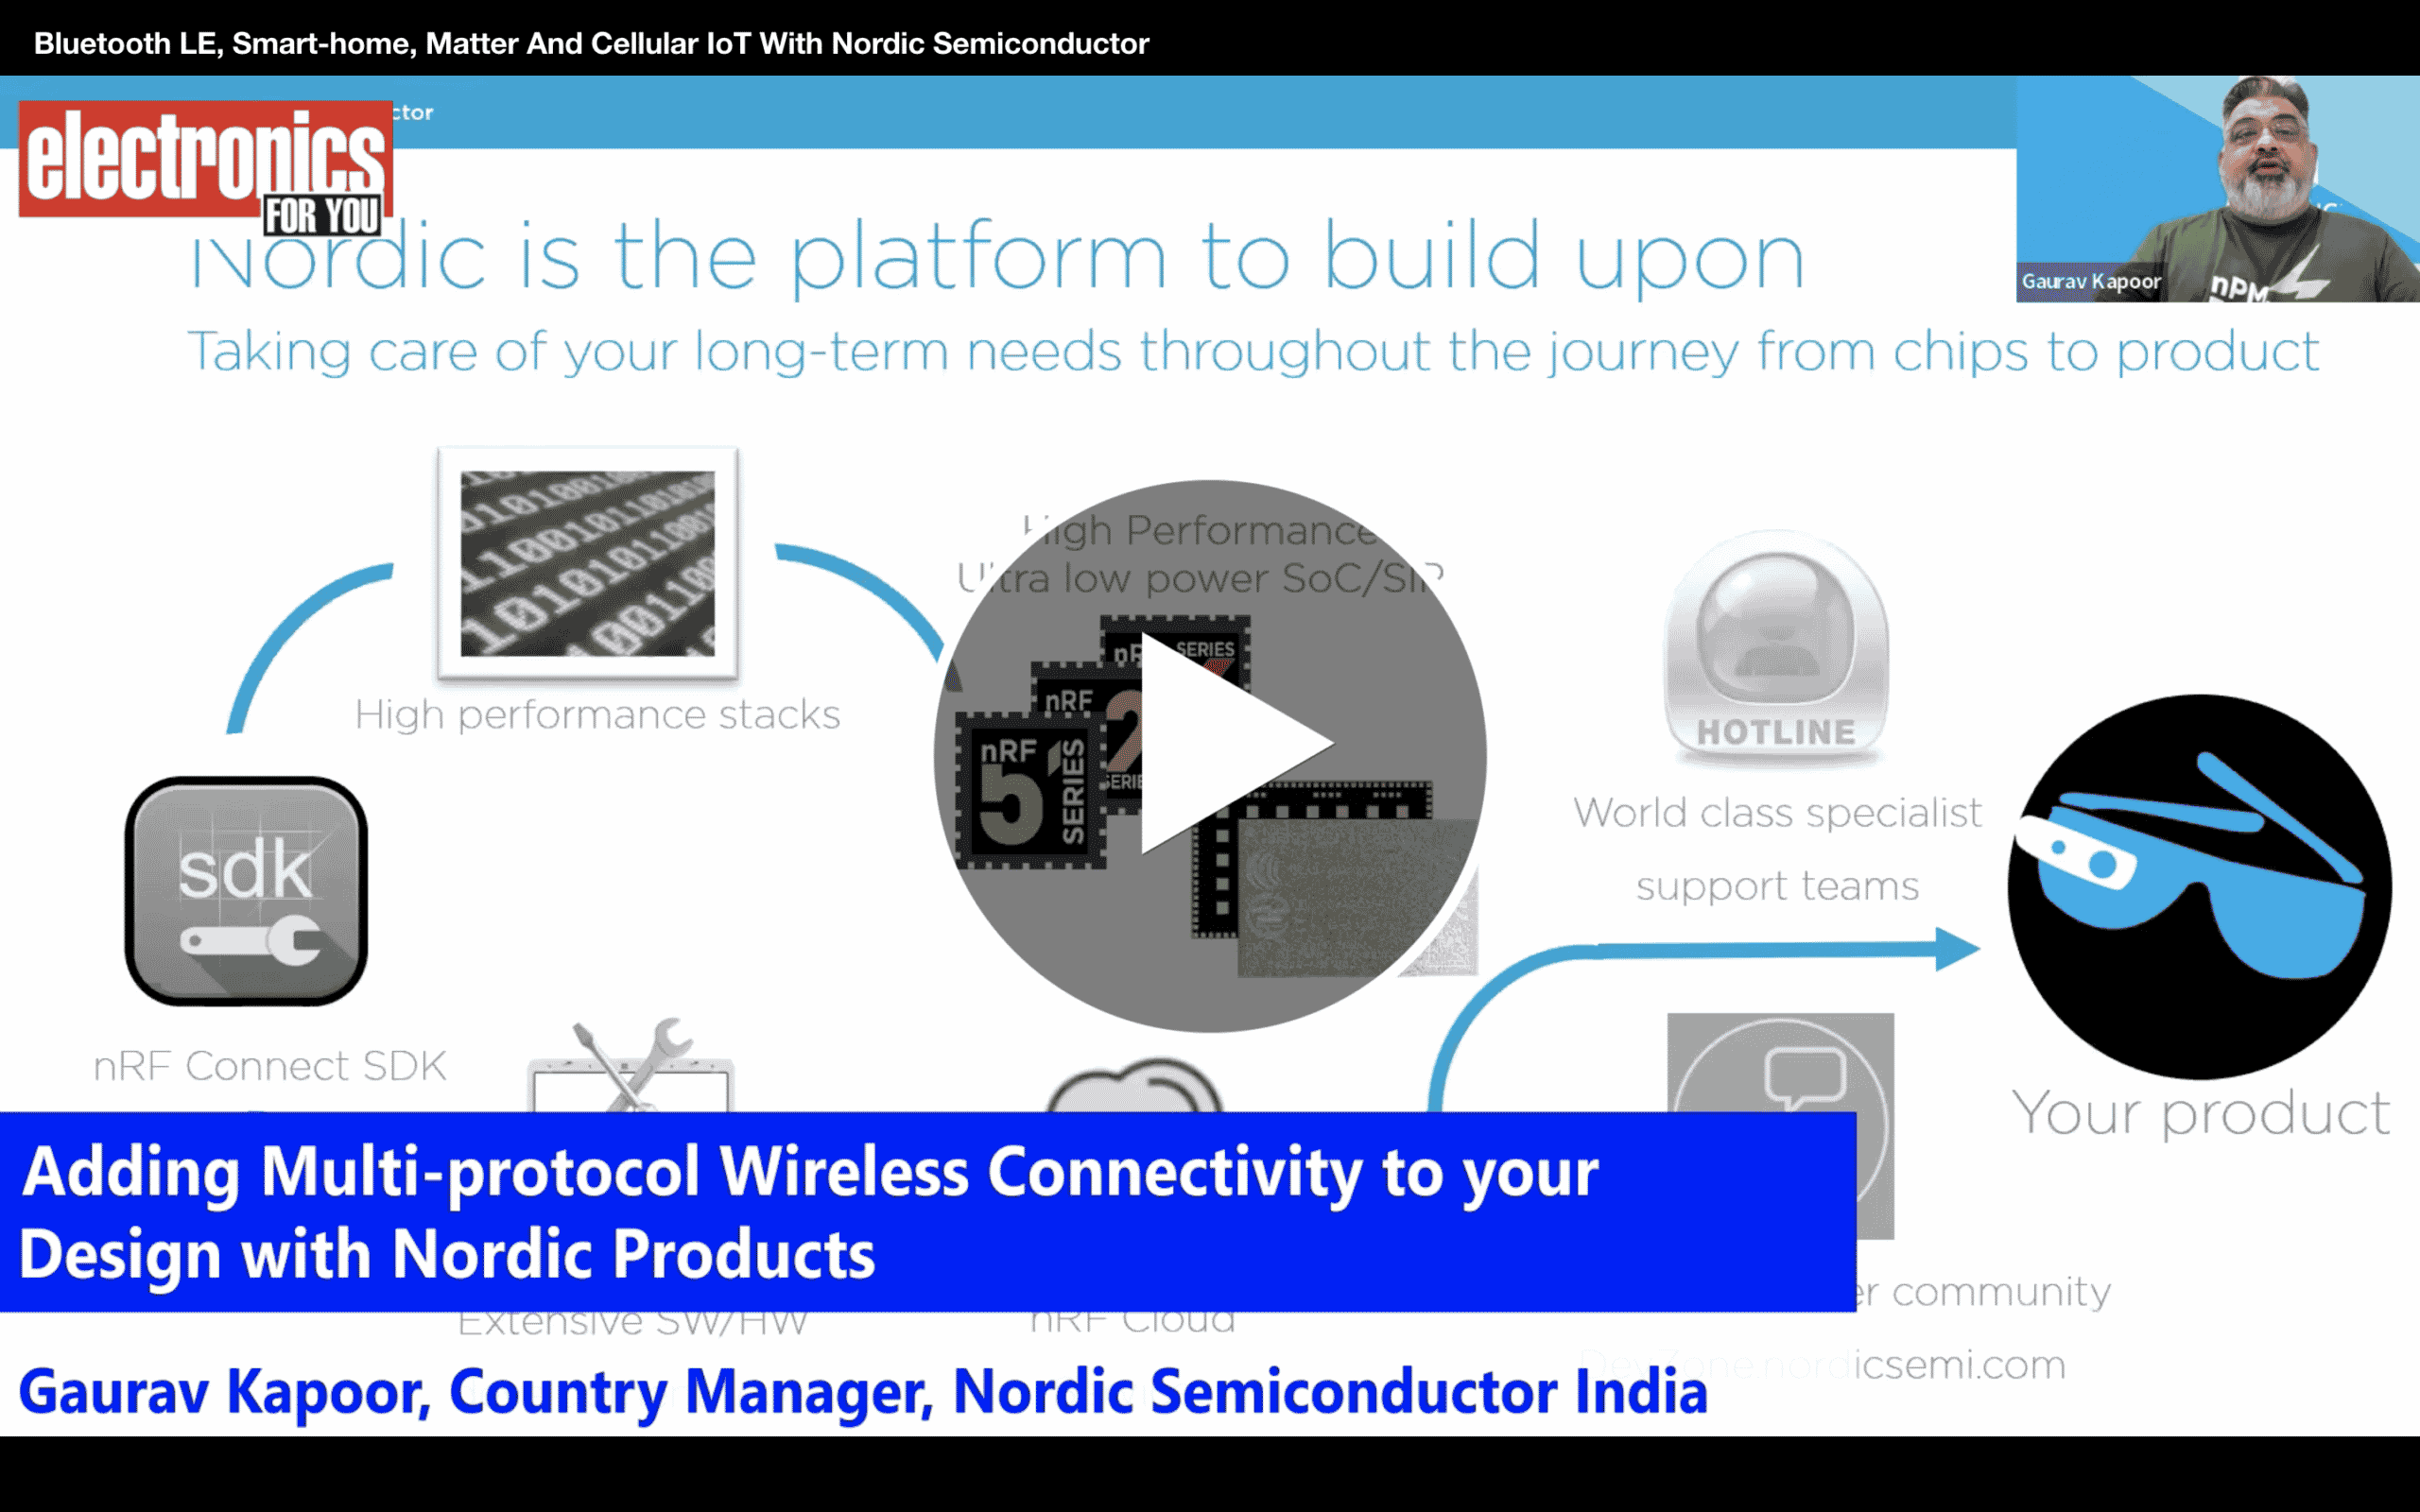 Bluetooth LE, Smart-home, Matter And Cellular IoT With Nordic Semiconductor